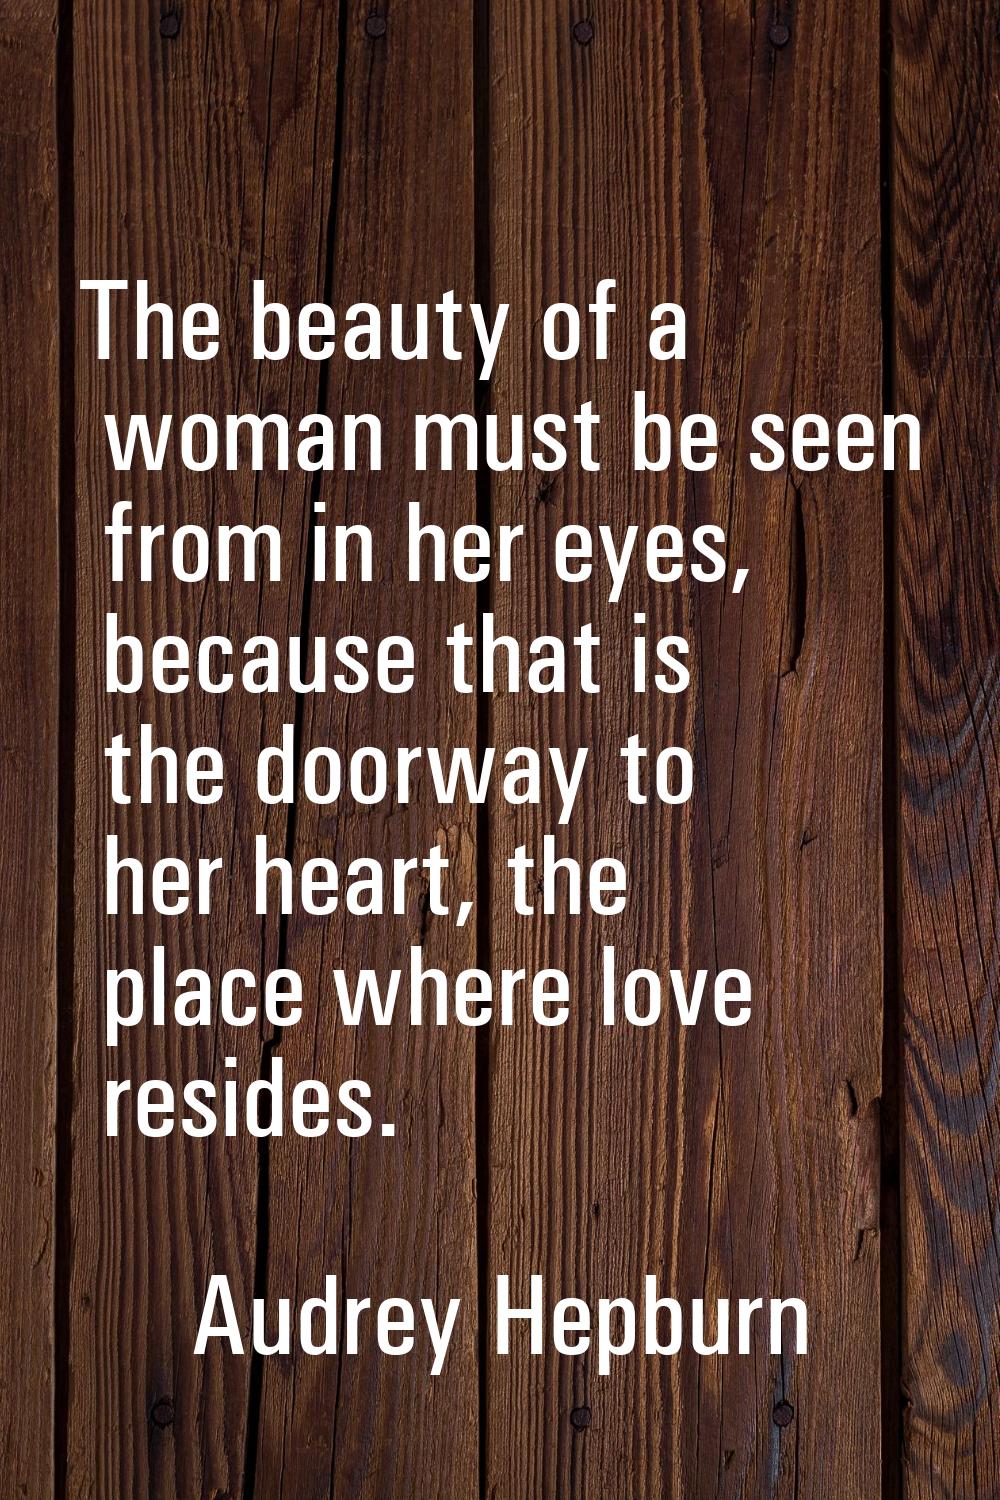 The beauty of a woman must be seen from in her eyes, because that is the doorway to her heart, the 